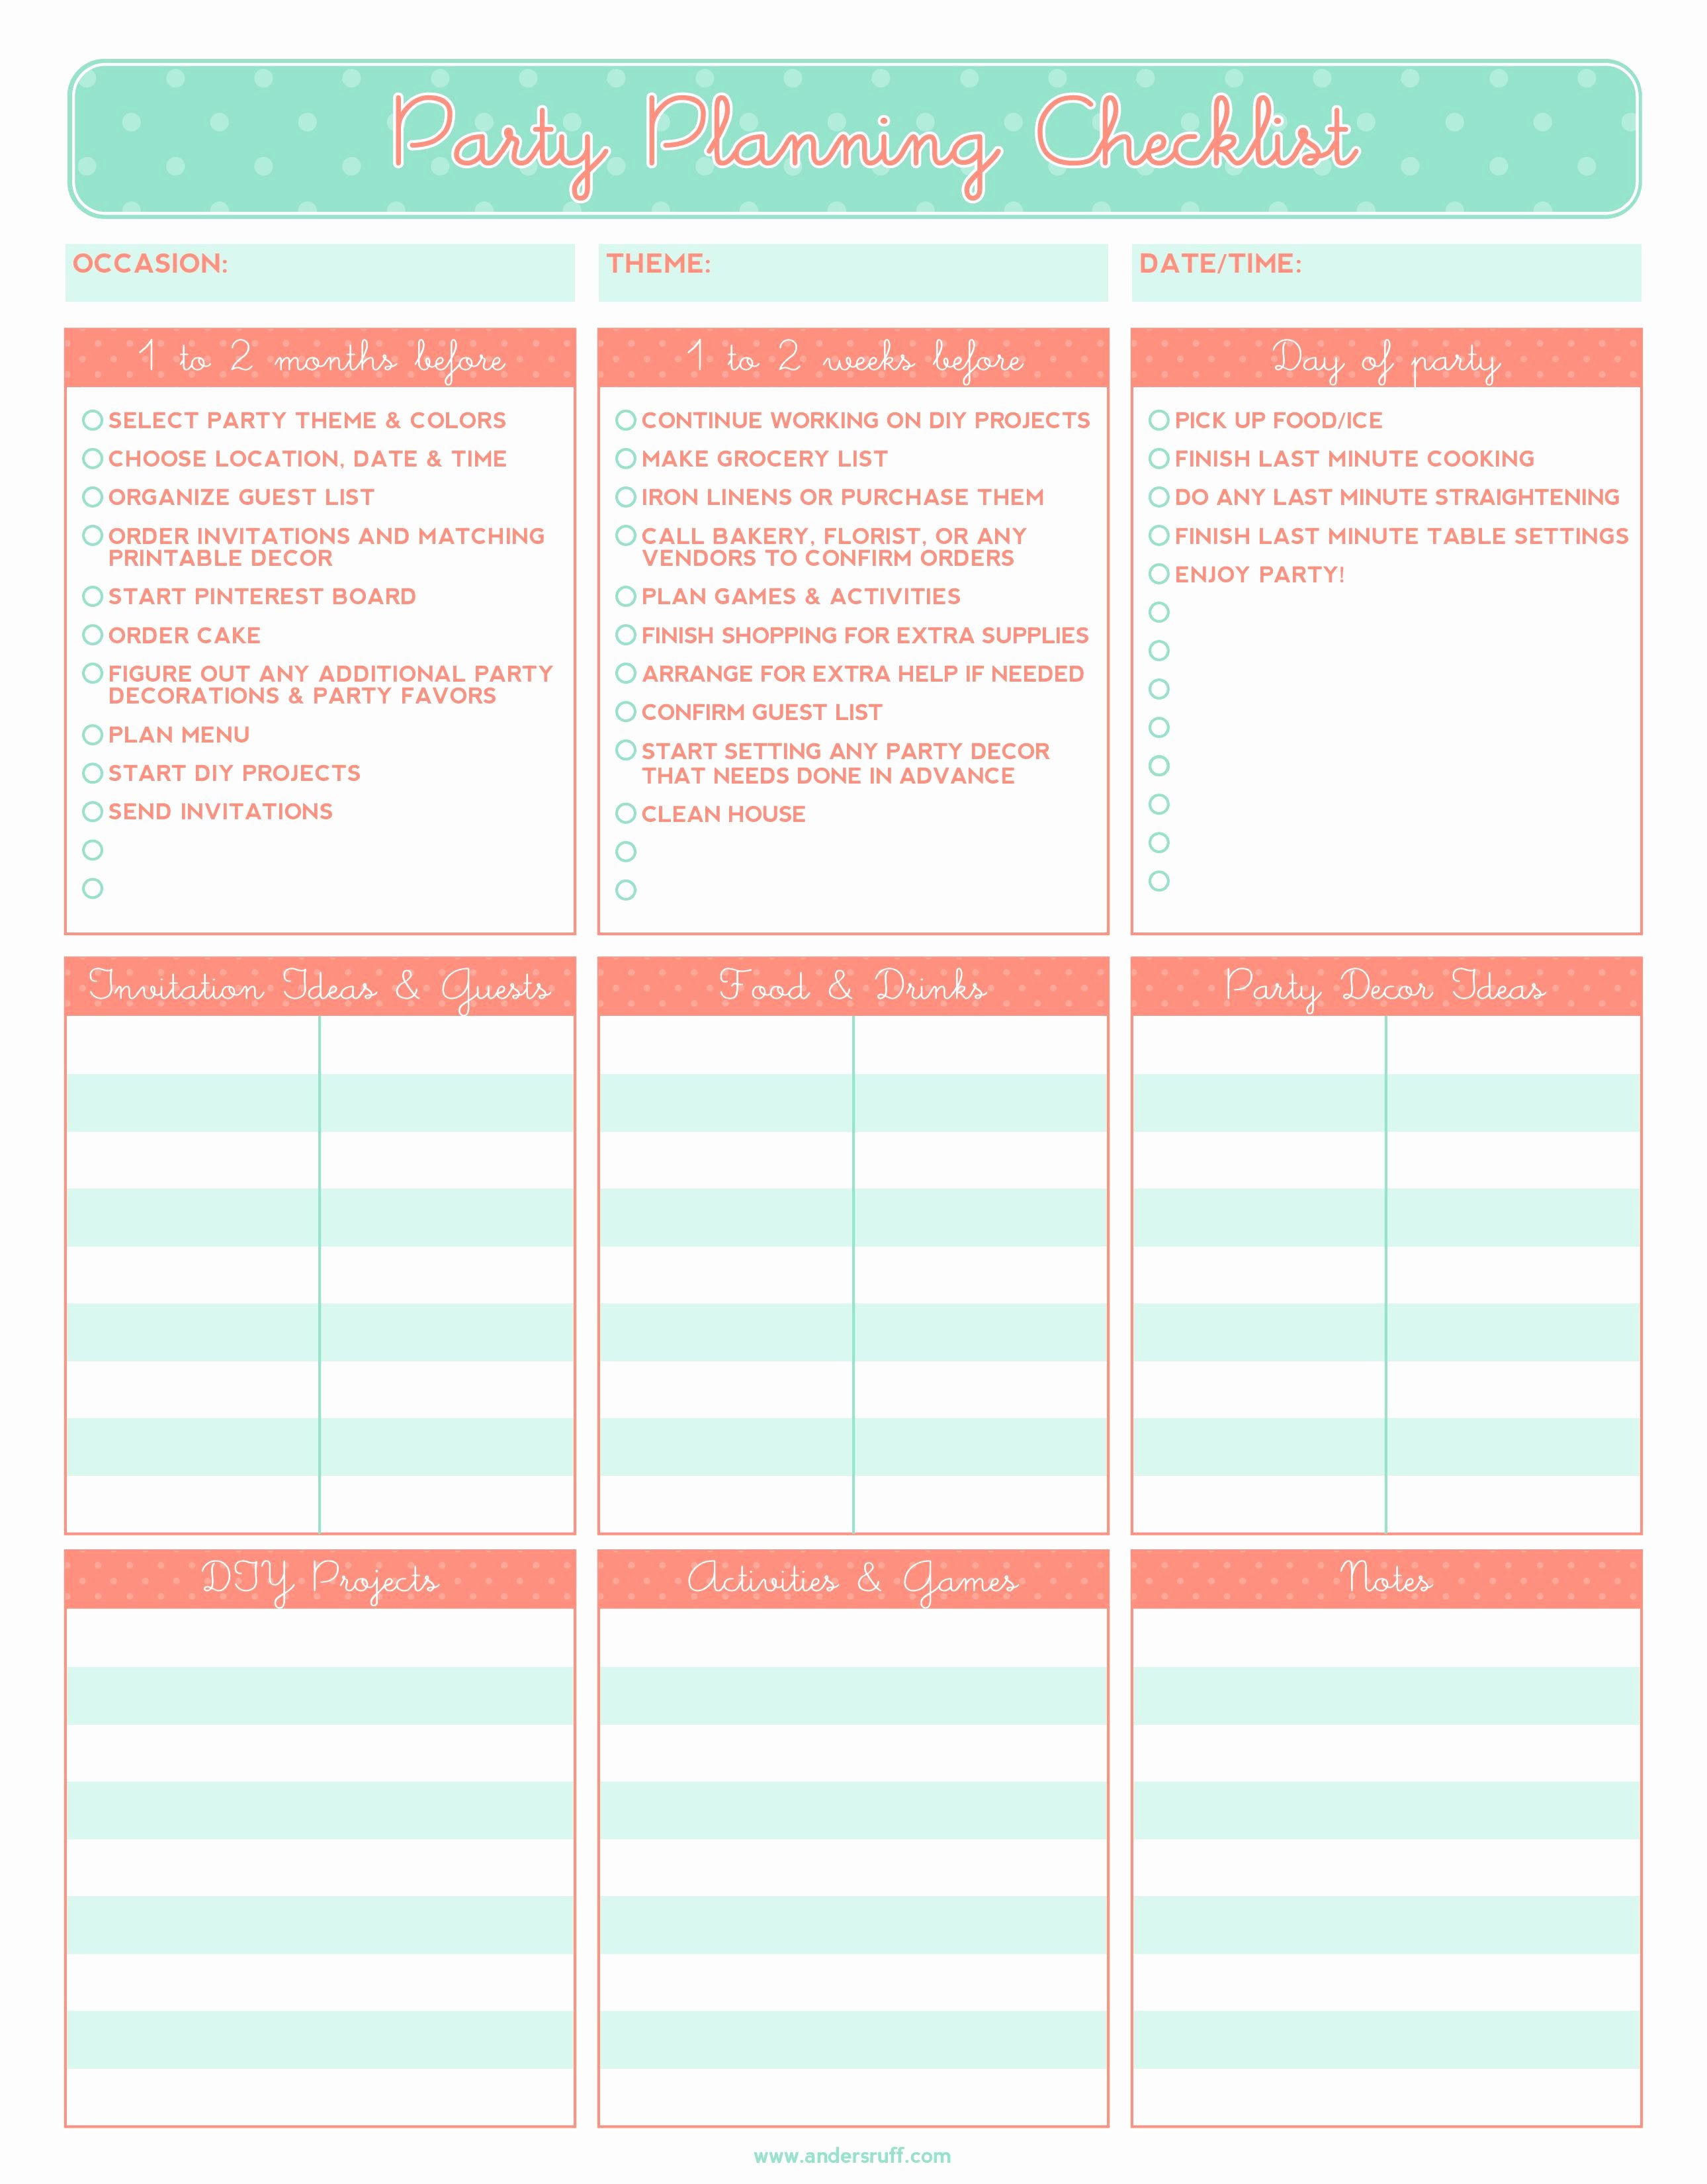 Free Printable Party Planning Checklist